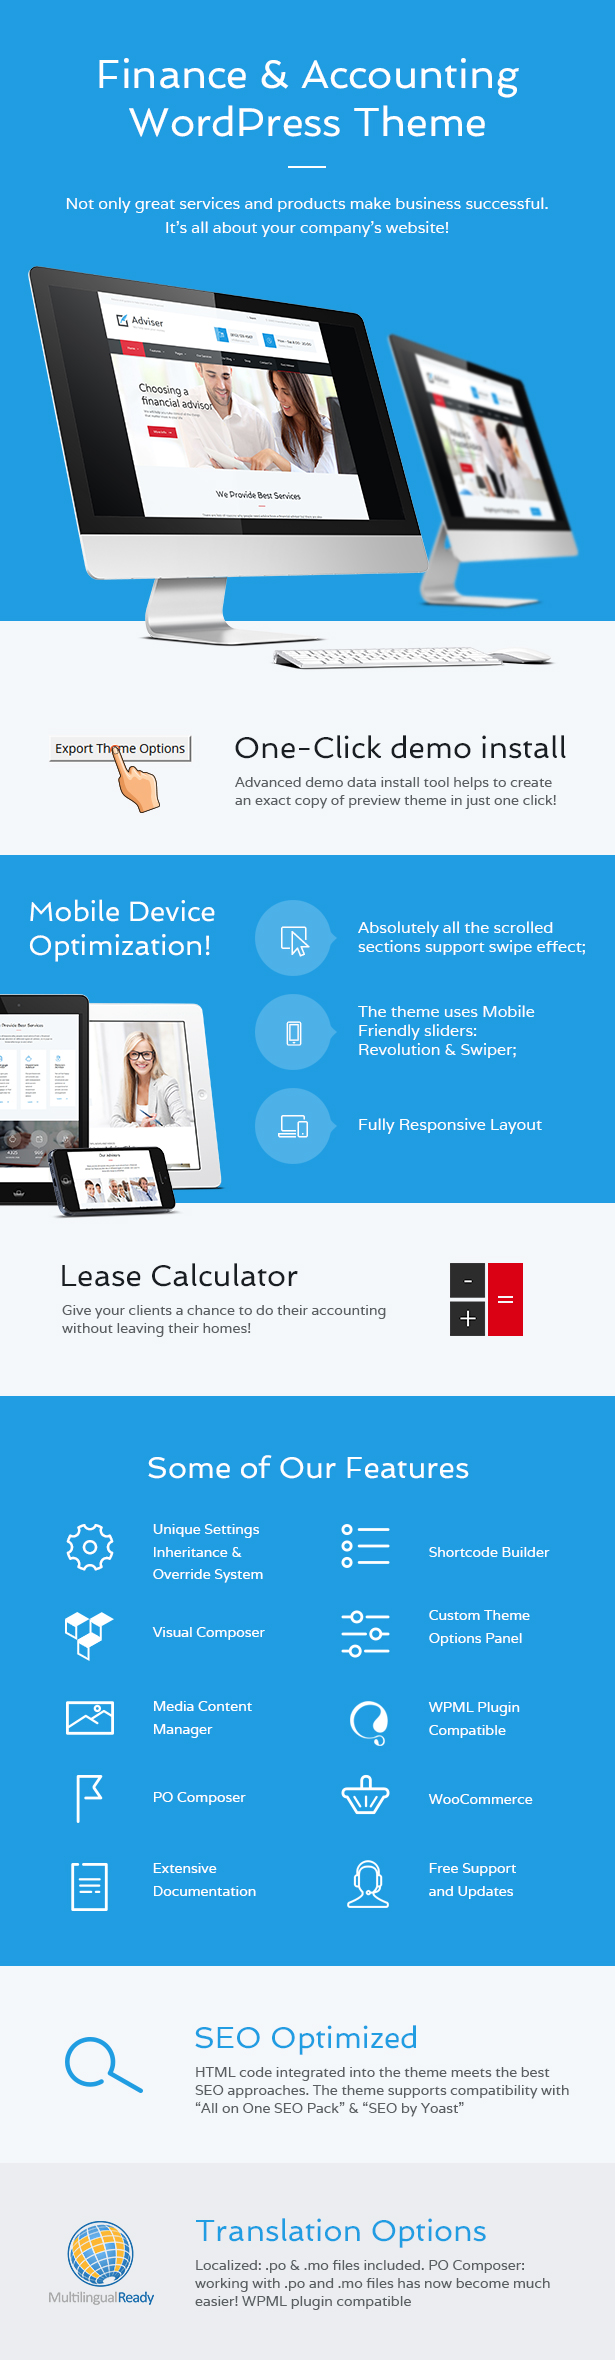 Finance & Accounting WordPress Theme features